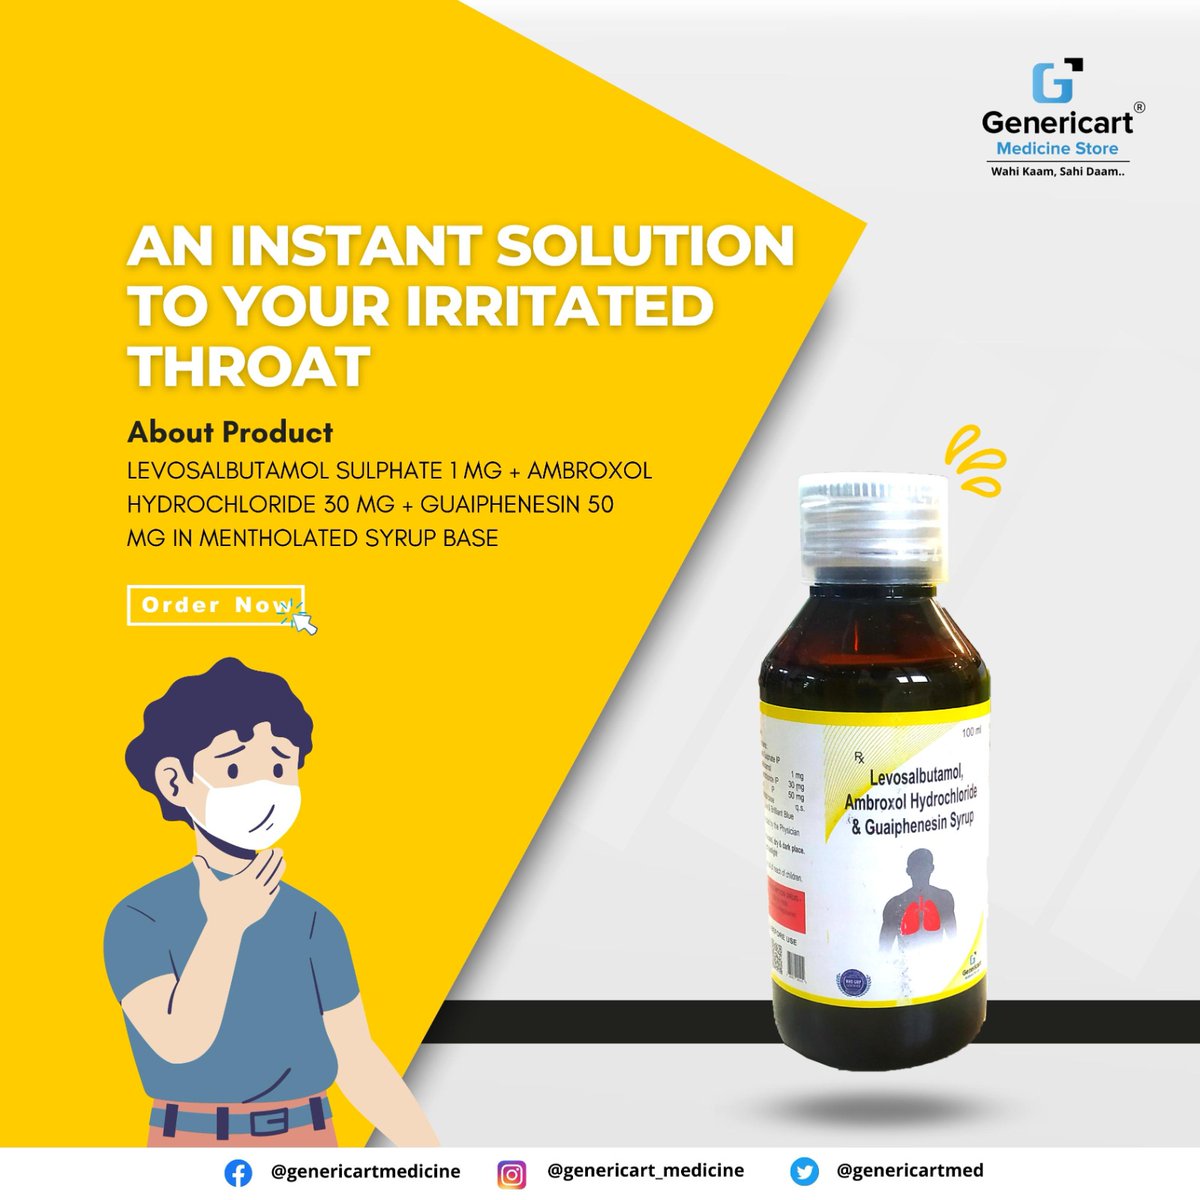 🤧 AN INSTANT SOLUTION TO YOUR IRRITATED THROAT

About Product :LEVOSALBUTAMOL SULPHATE 1 MG + AMBROXOL HYDROCHLORIDE 30 MG + GUAIPHENESIN 50 MG IN MENTHOLATED SYRUP BASE

📲 Order Now

#genericart #medicine #savemoney #qualitymedicine #costeffective #algorithmstrategyconsulting